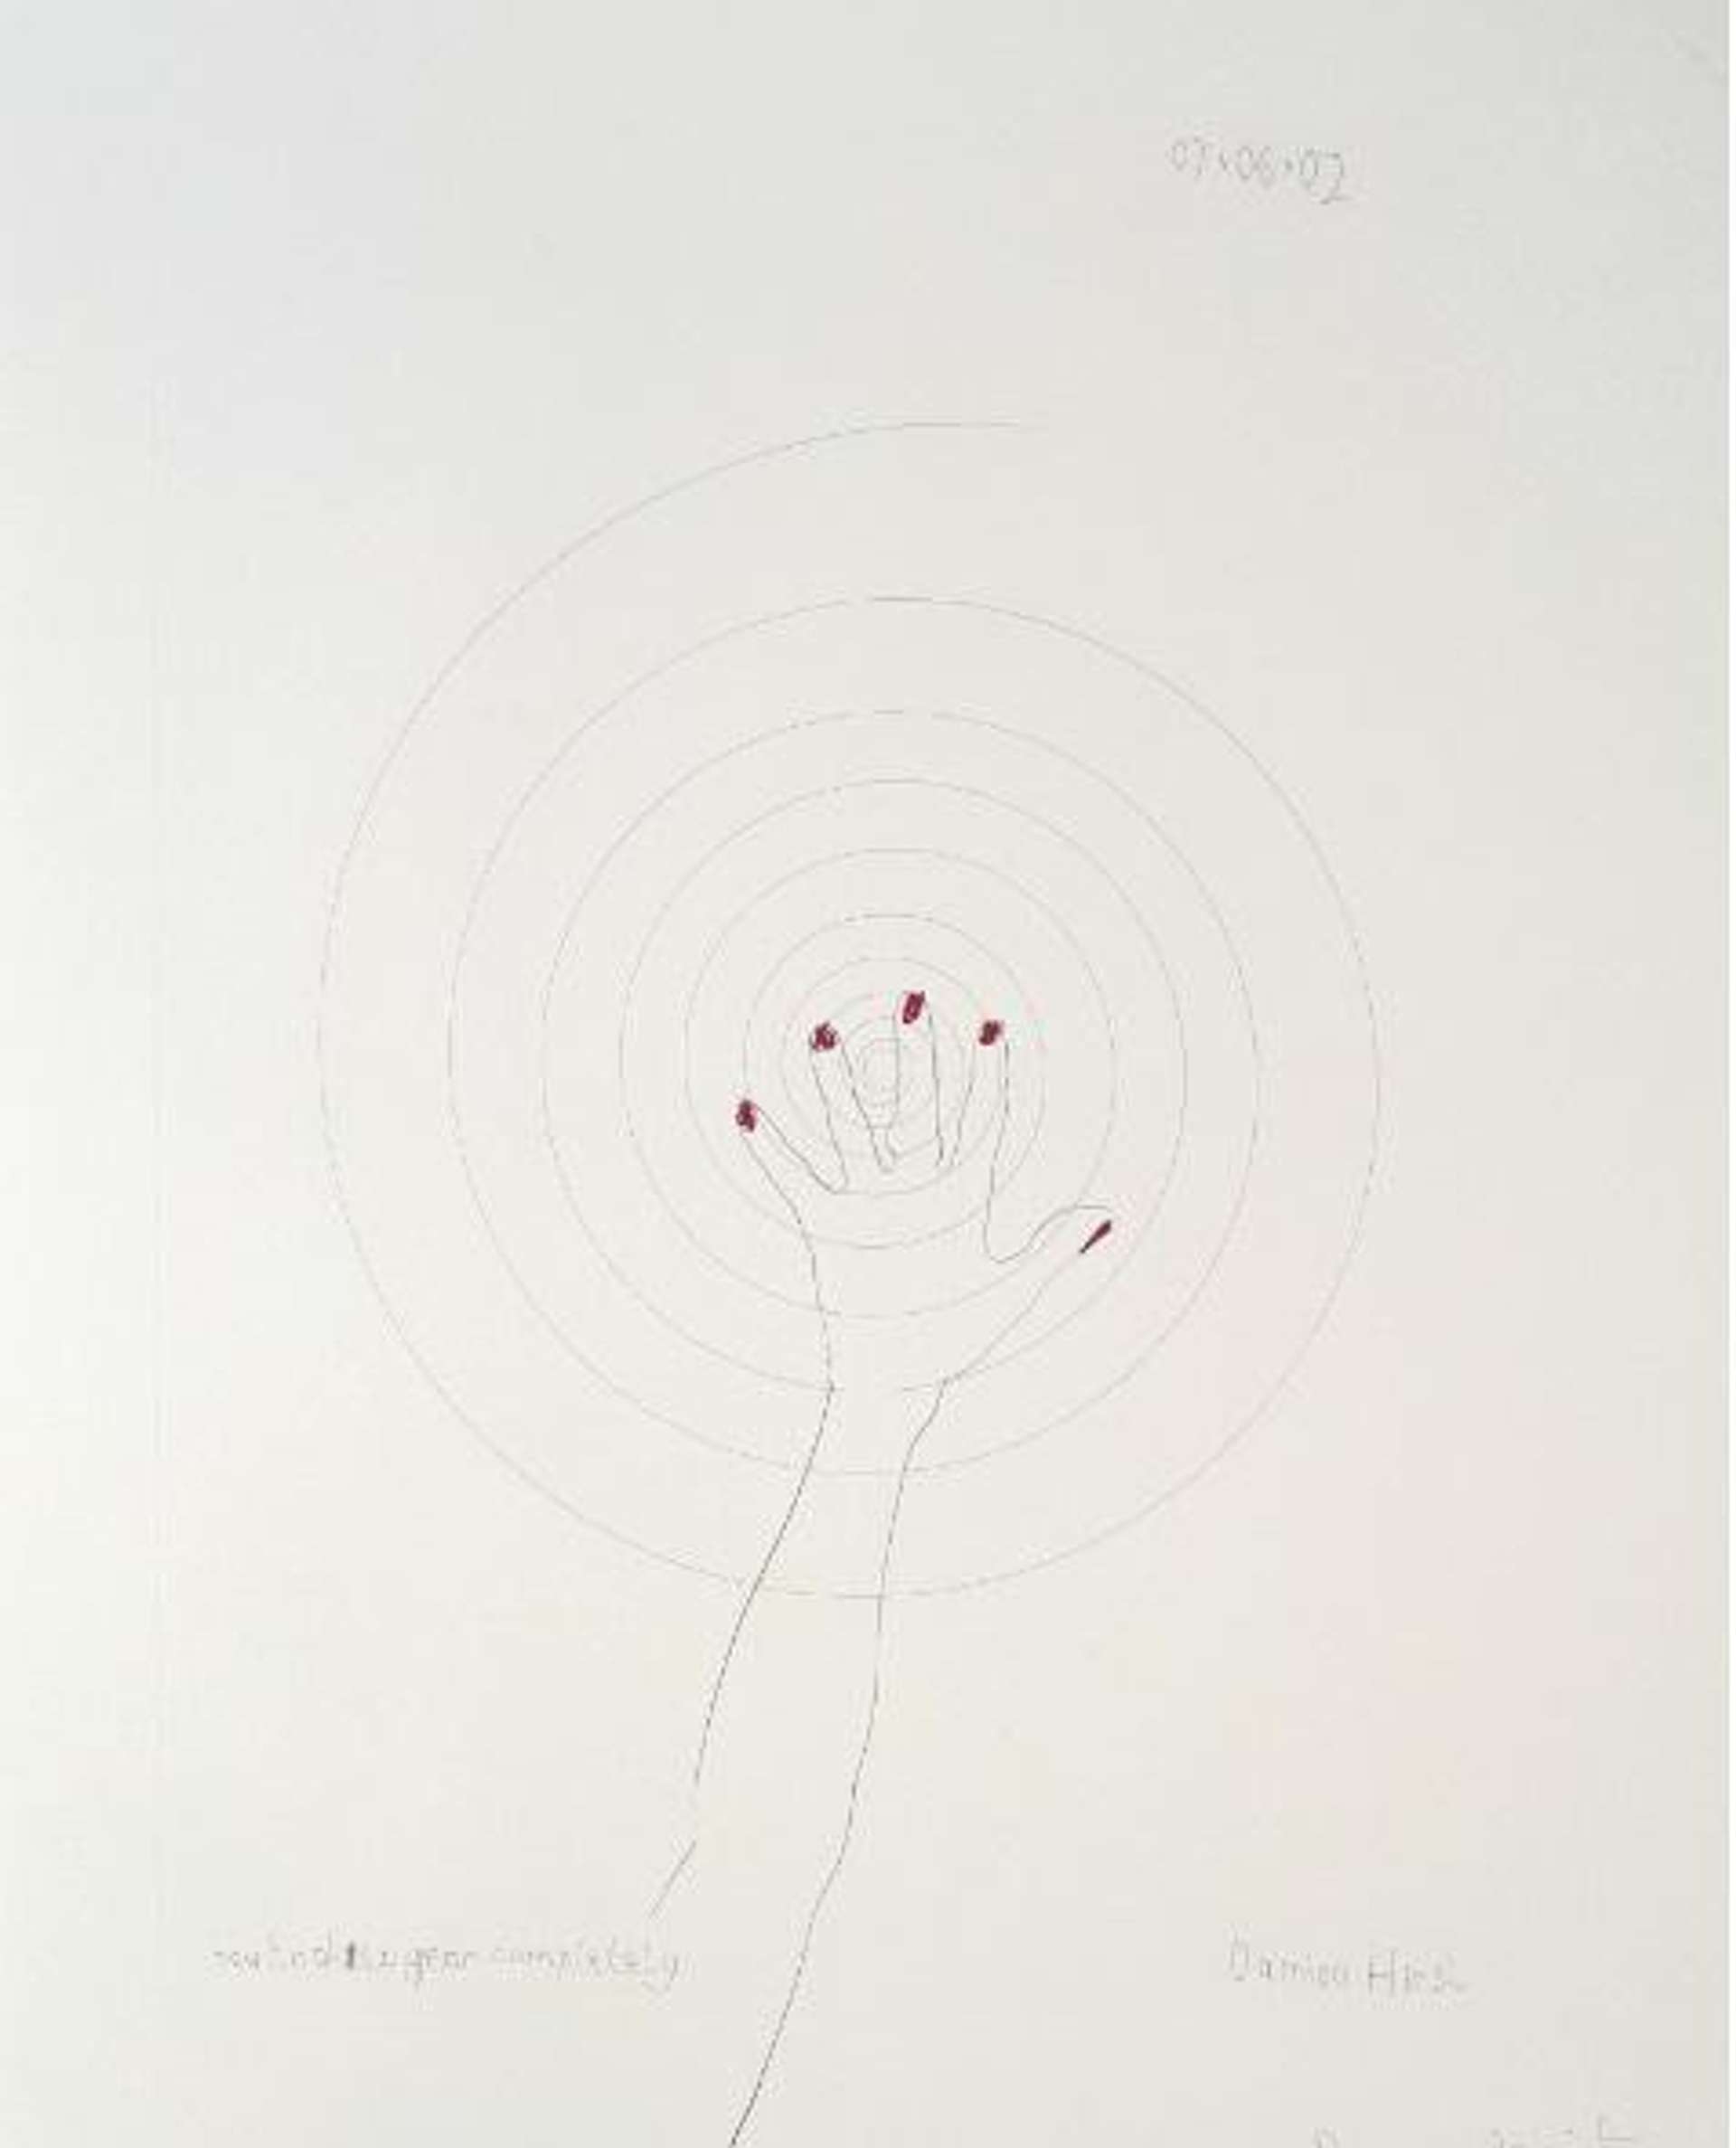 Damien Hirst: How To Disappear Completely - Signed Print